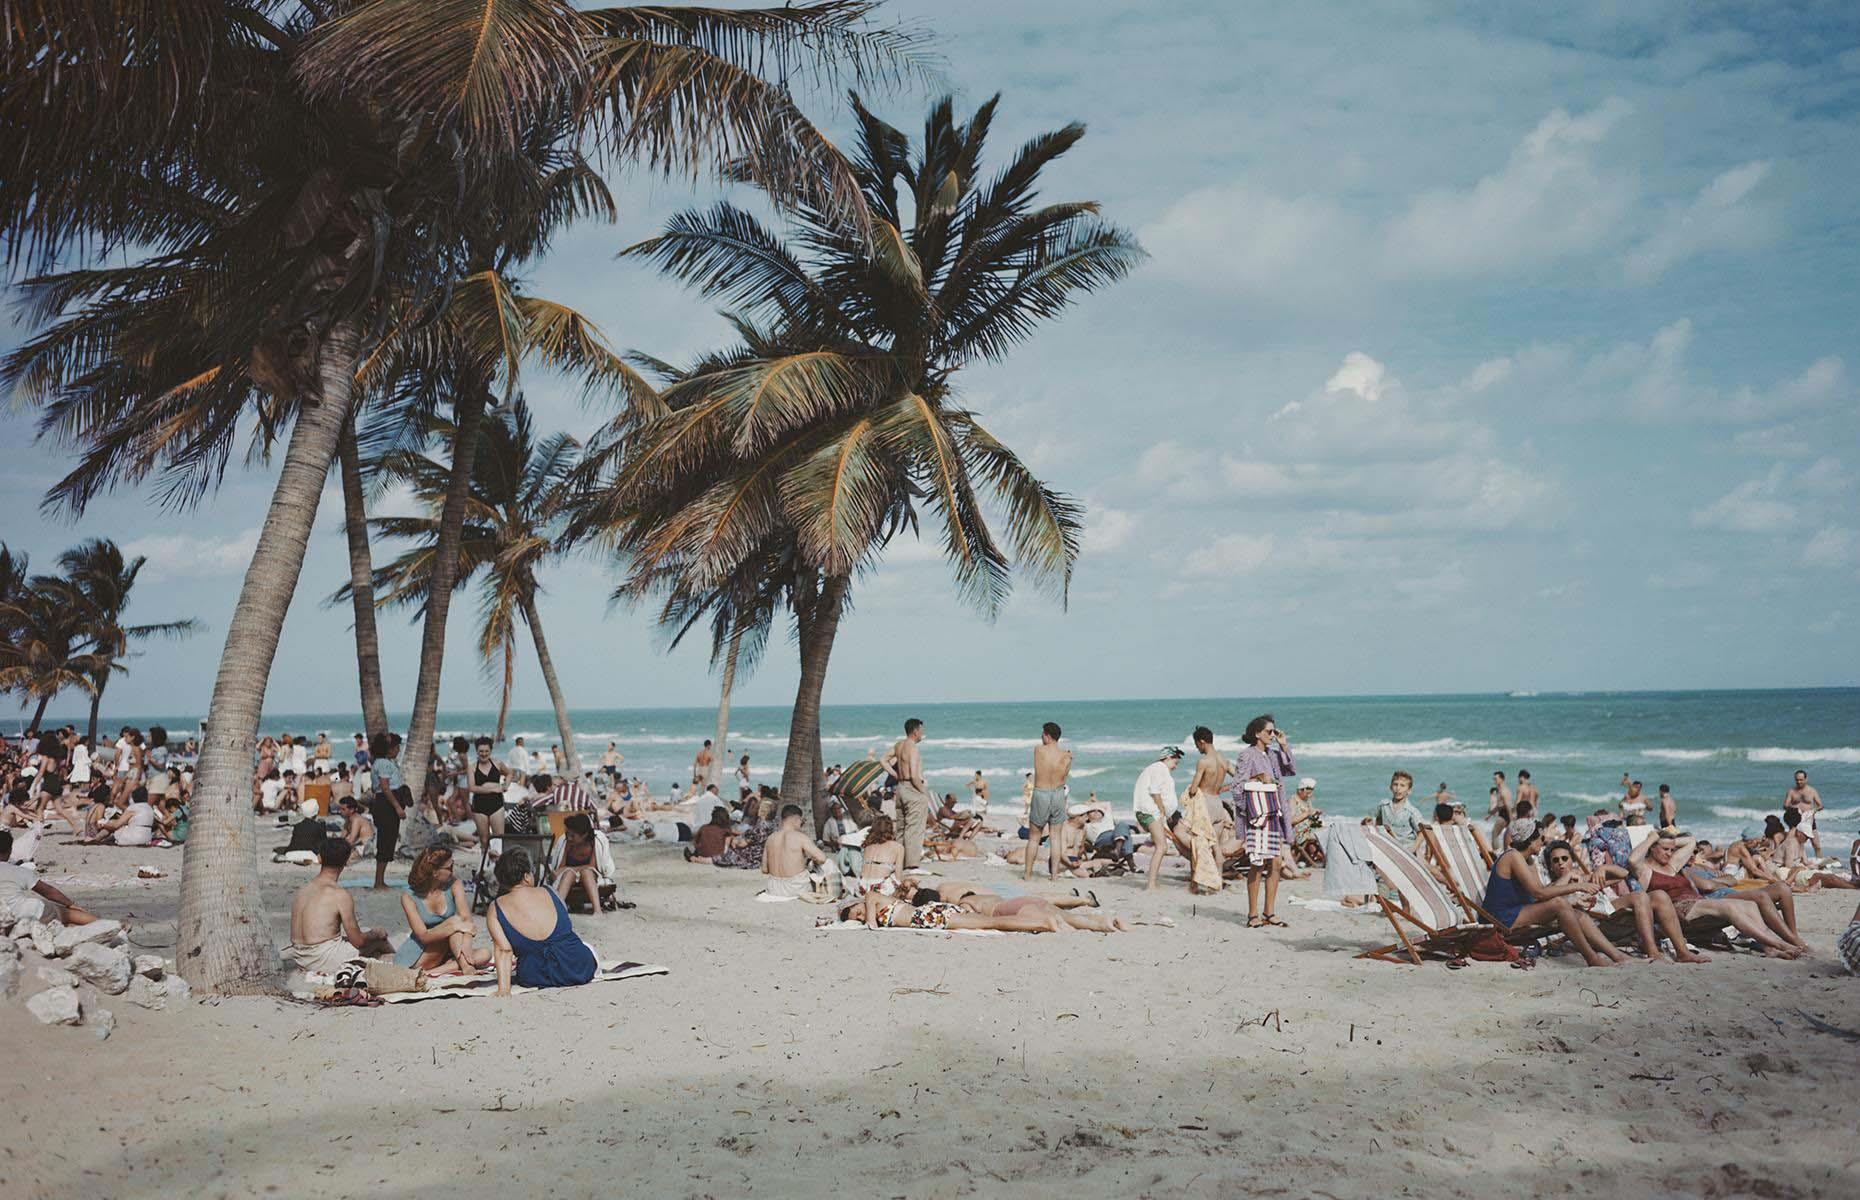 <p>Florida remained the destination of choice through the 1960s. As new hotels, resorts and amusements continued to spring up near the coast, the Sunshine State was flooded with people each summer and continues to be a popular vacation destination today. Here, sun-worshippers relax beneath the palms on Miami Beach in southern Florida circa 1965.</p>  <p><a href="https://www.loveexploring.com/galleries/114402/historic-images-of-the-worlds-famous-seaside-resorts?page=1"><strong>Take a look at more historic images of the world's famous seaside resorts</strong></a></p>